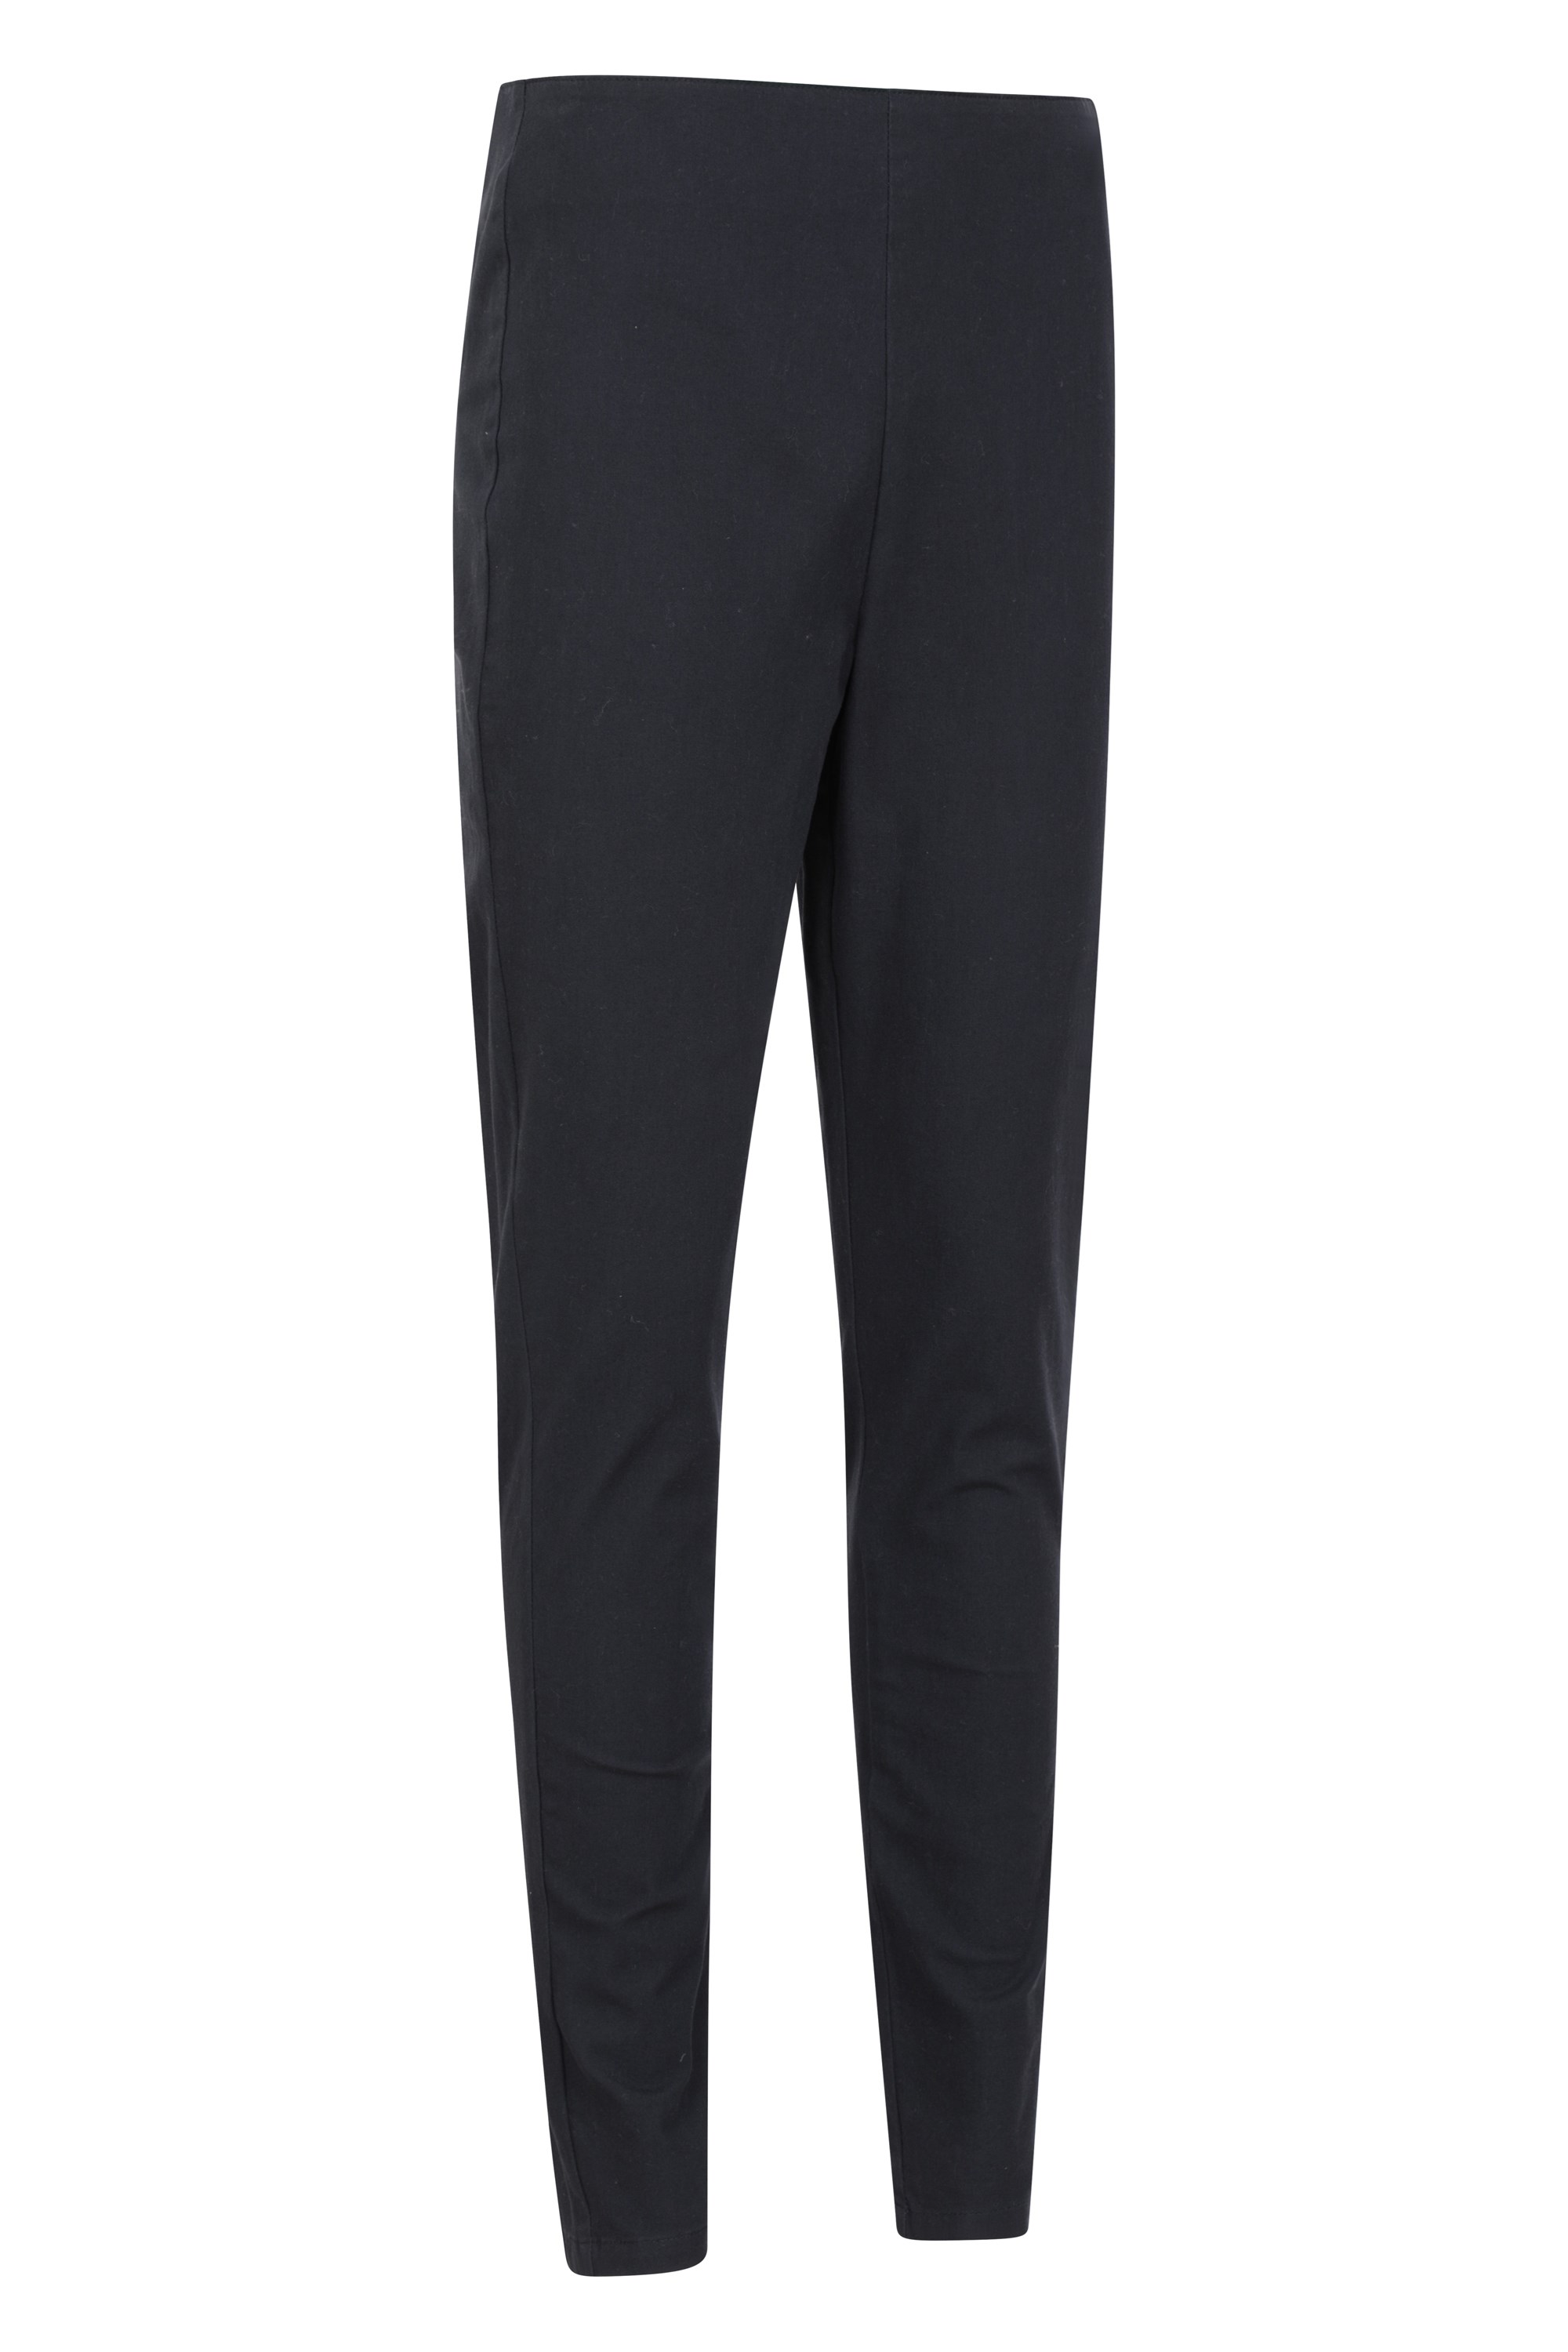 042055 PULL ON COTTON STRETCH WOMENS TROUSER